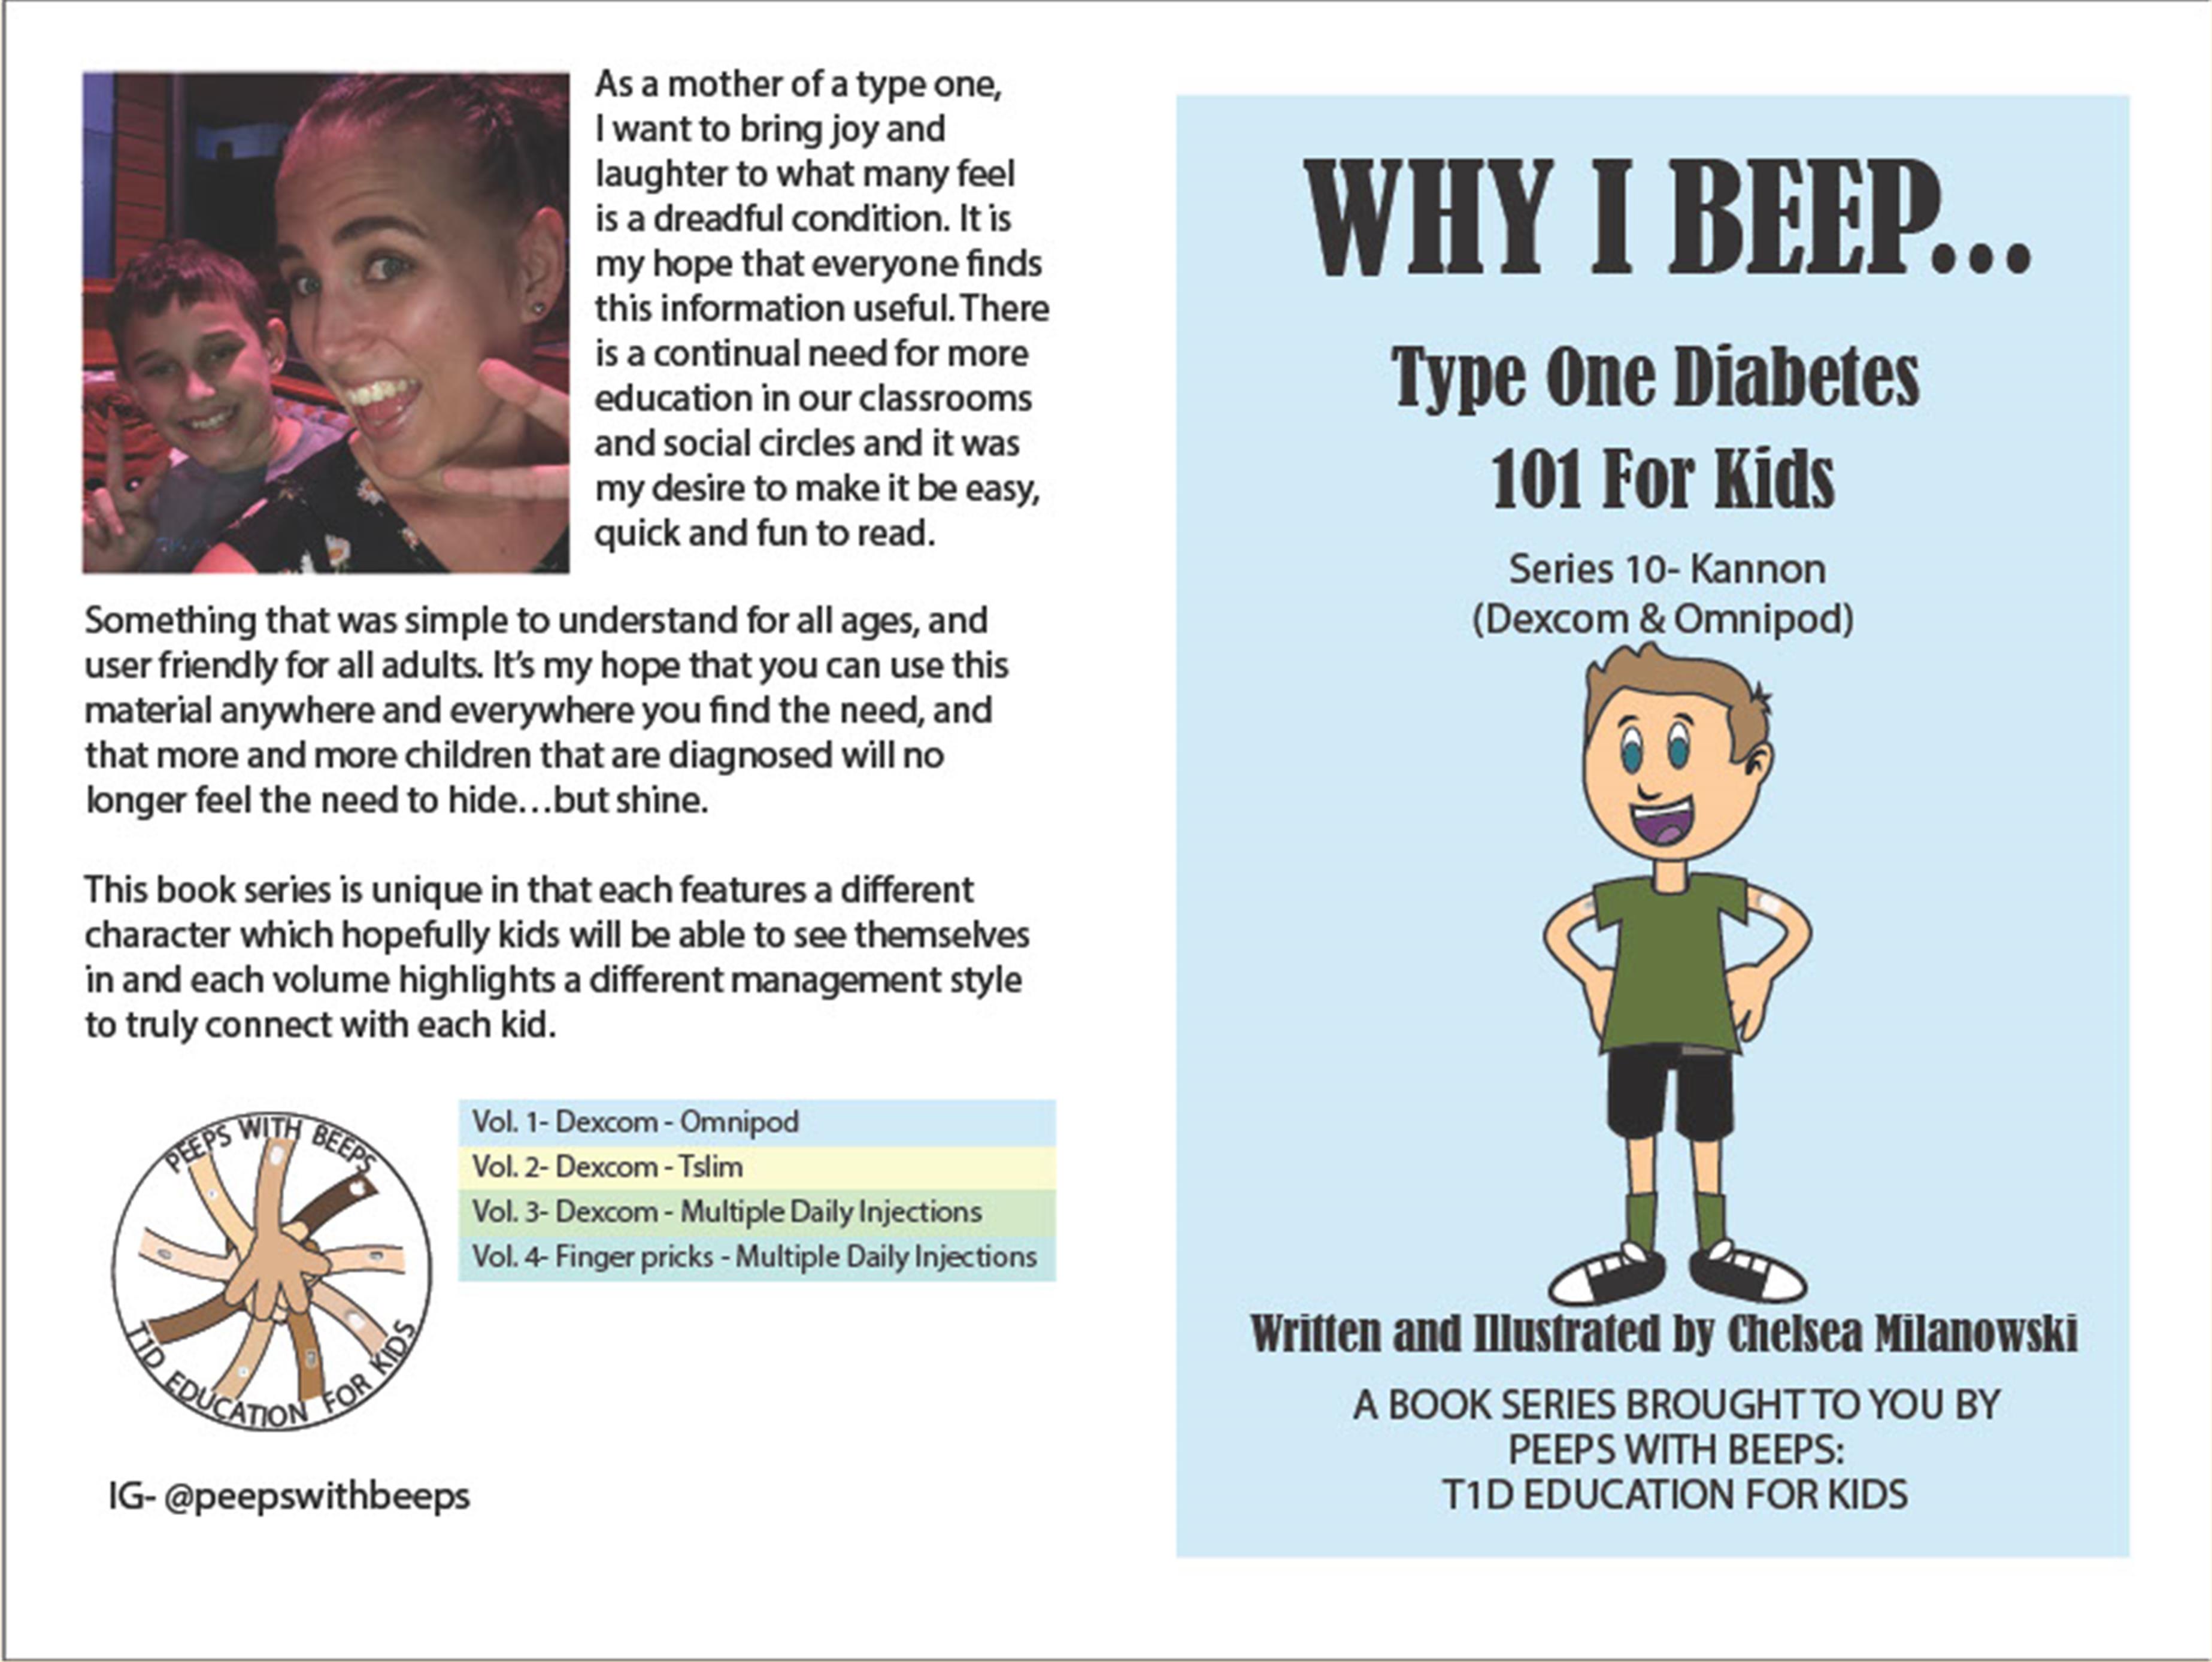 Why I beep. Type One Diabetes 101 for Kids. (Kannon - Dexcom & Omnipod) cover image